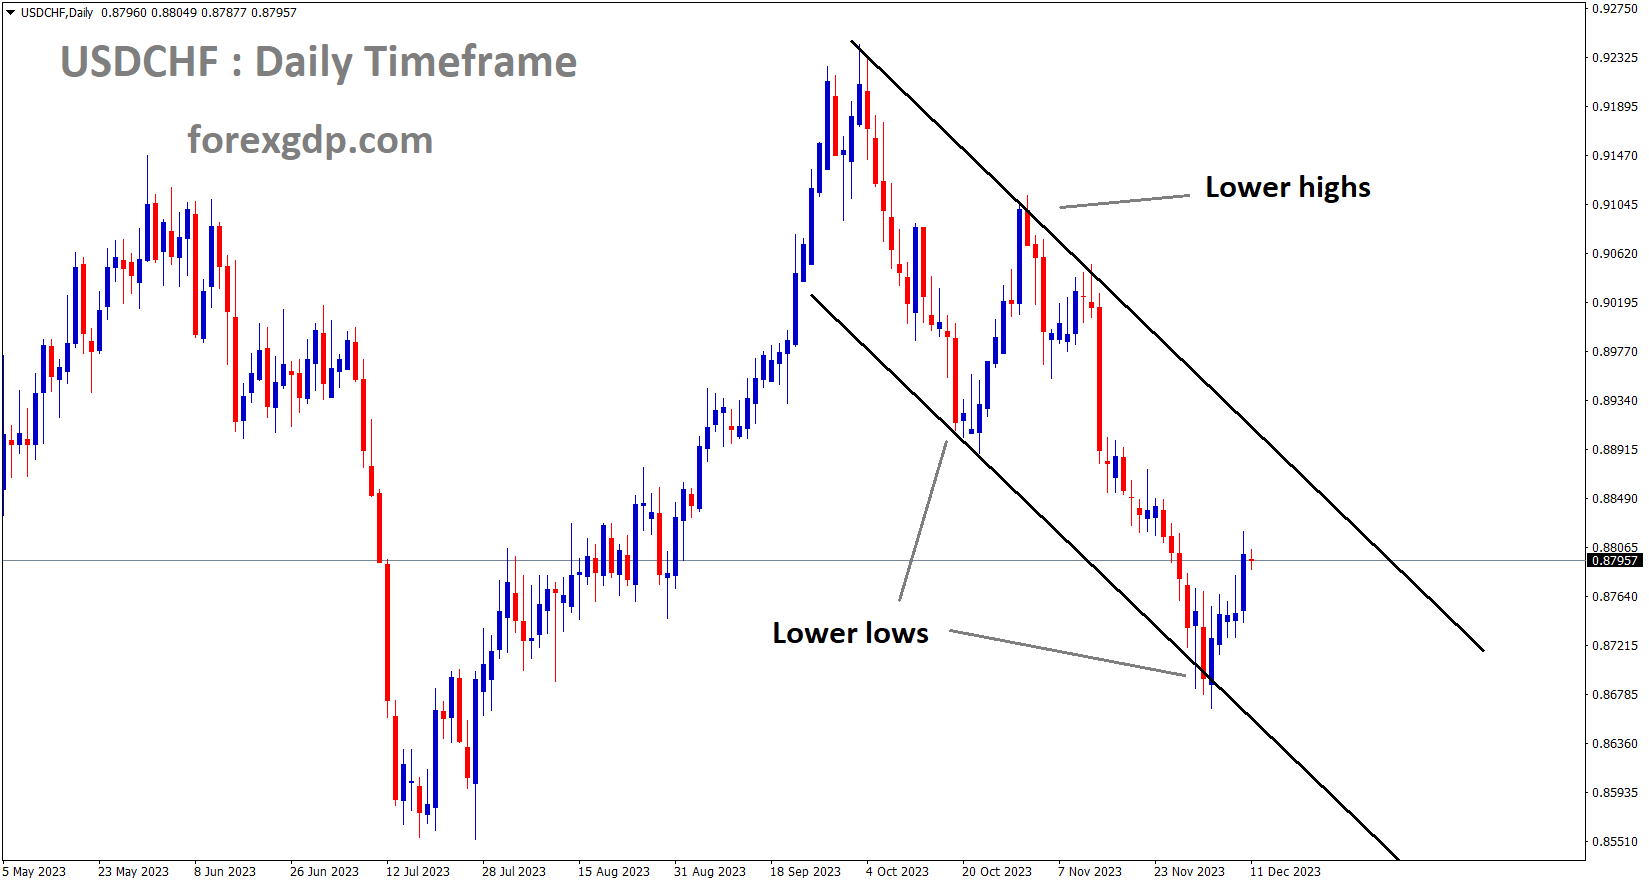 USDCHF is moving in descending channel and the market has rebounded from the lower low area of channel